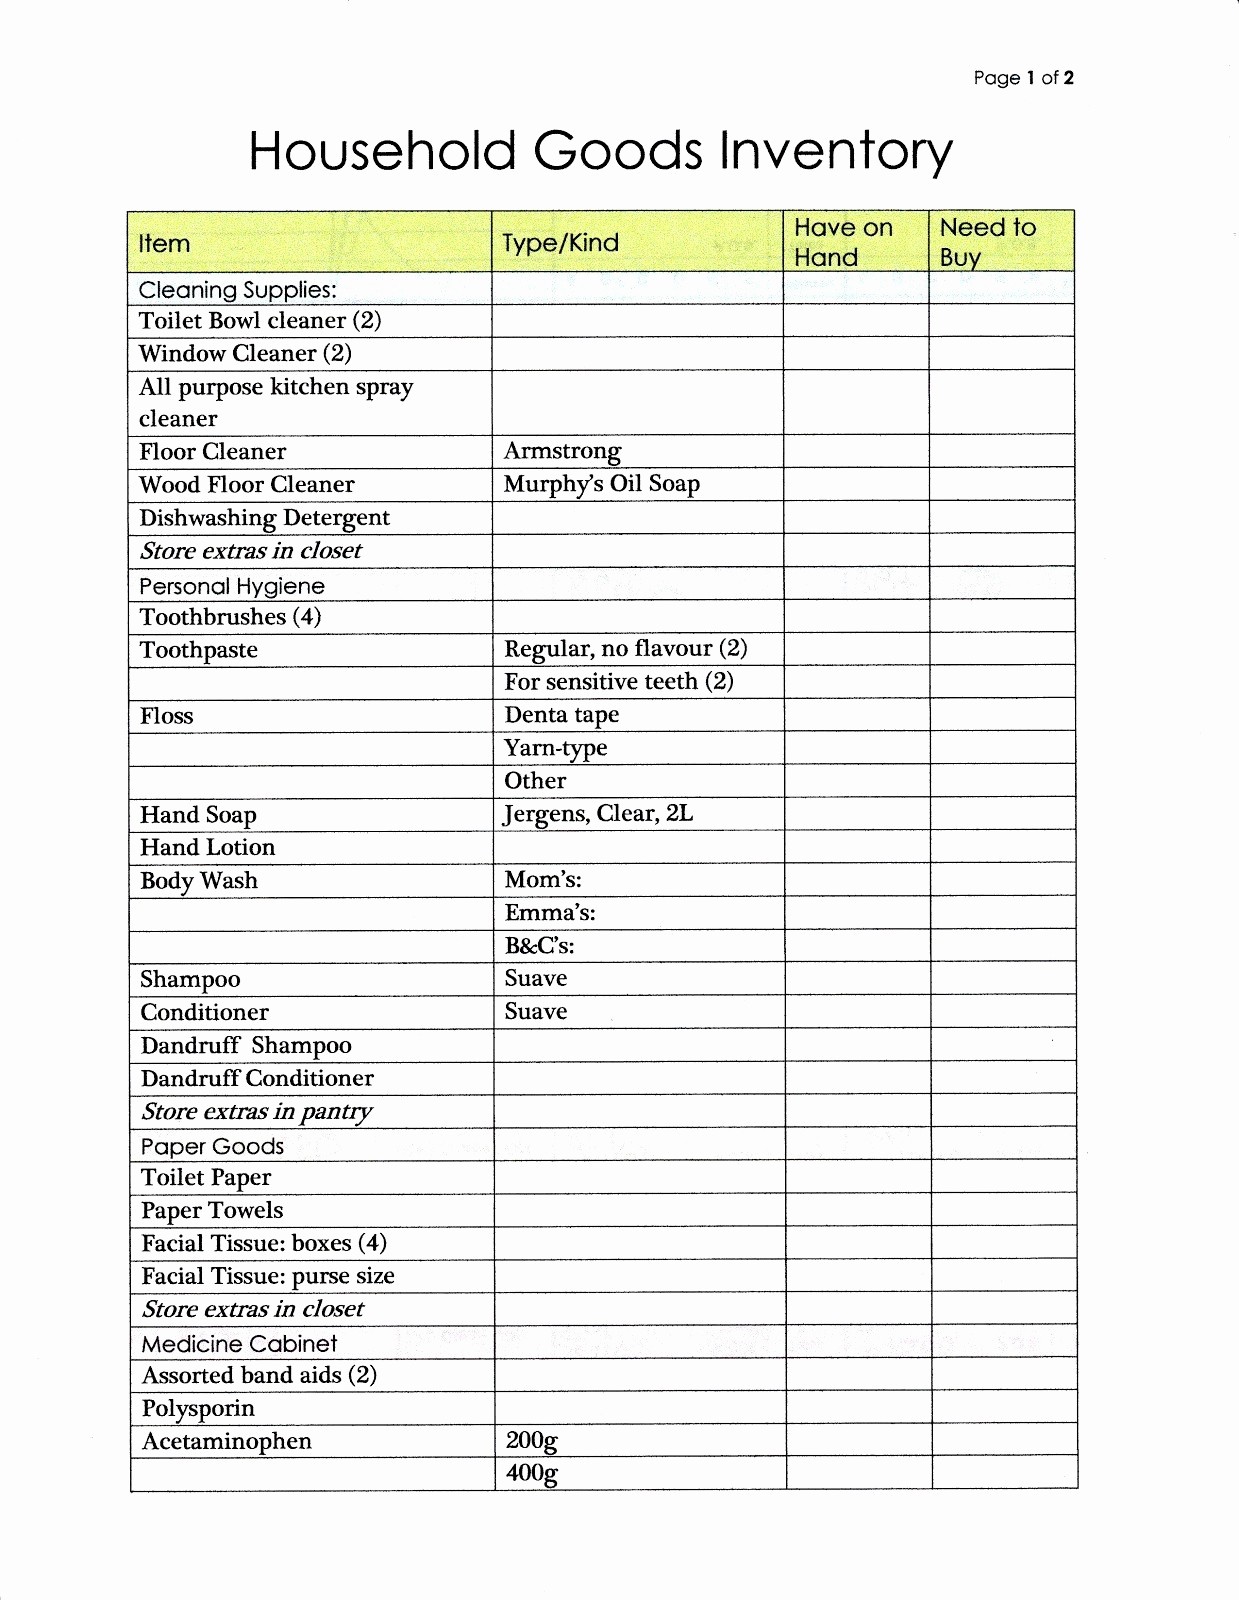 Master Pantry Inventory List Awesome Document